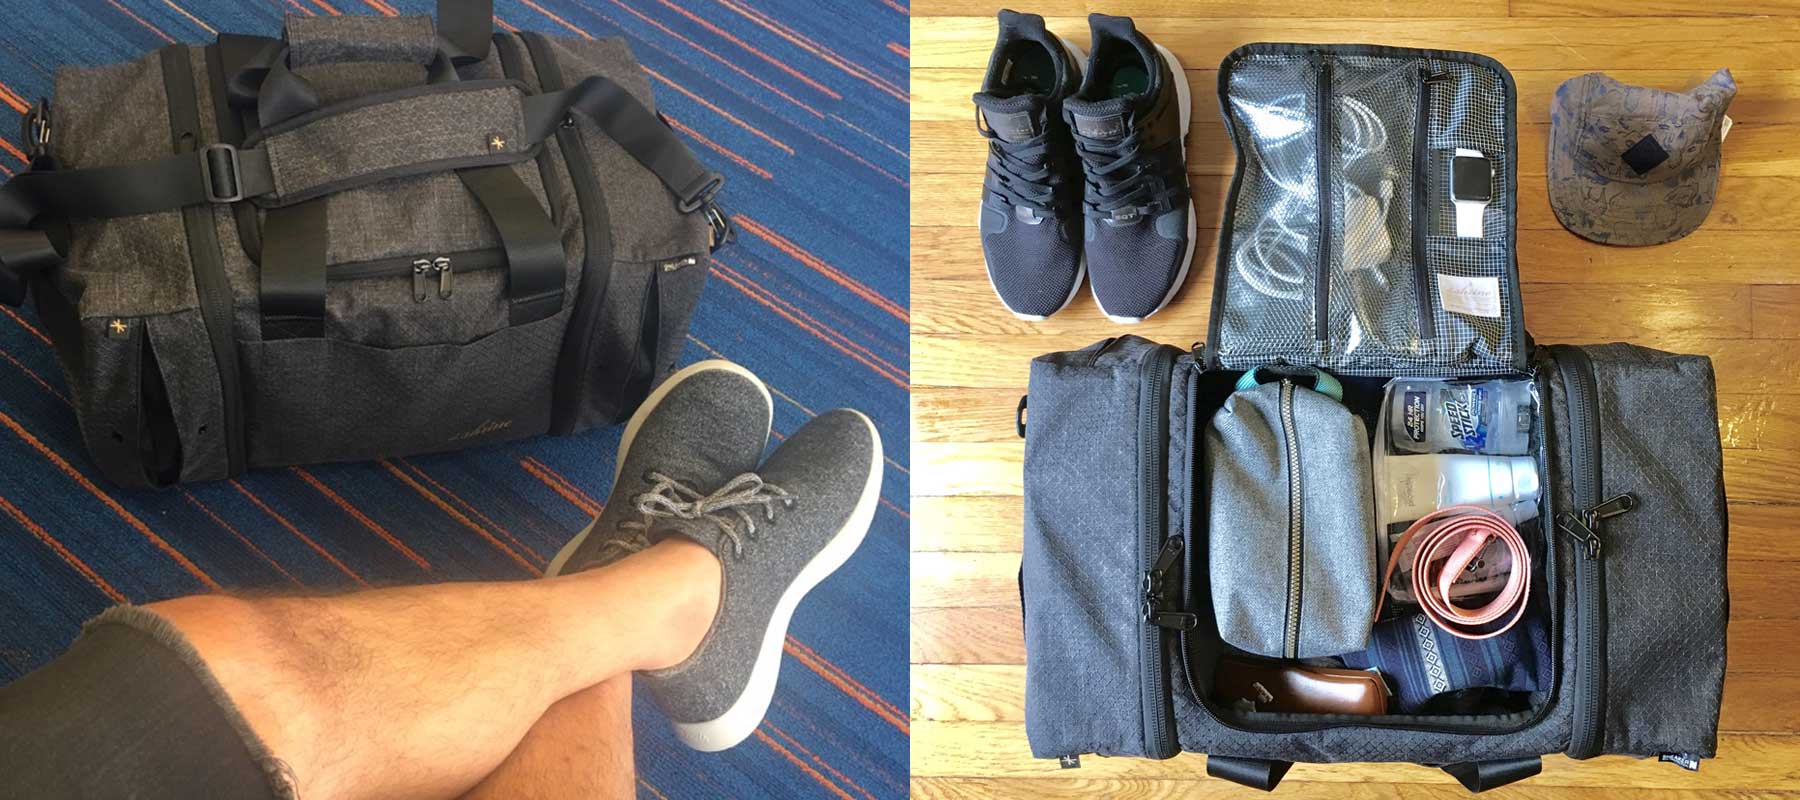 Our carry-on sized duffle bag works perfectly for a 5 day trip!